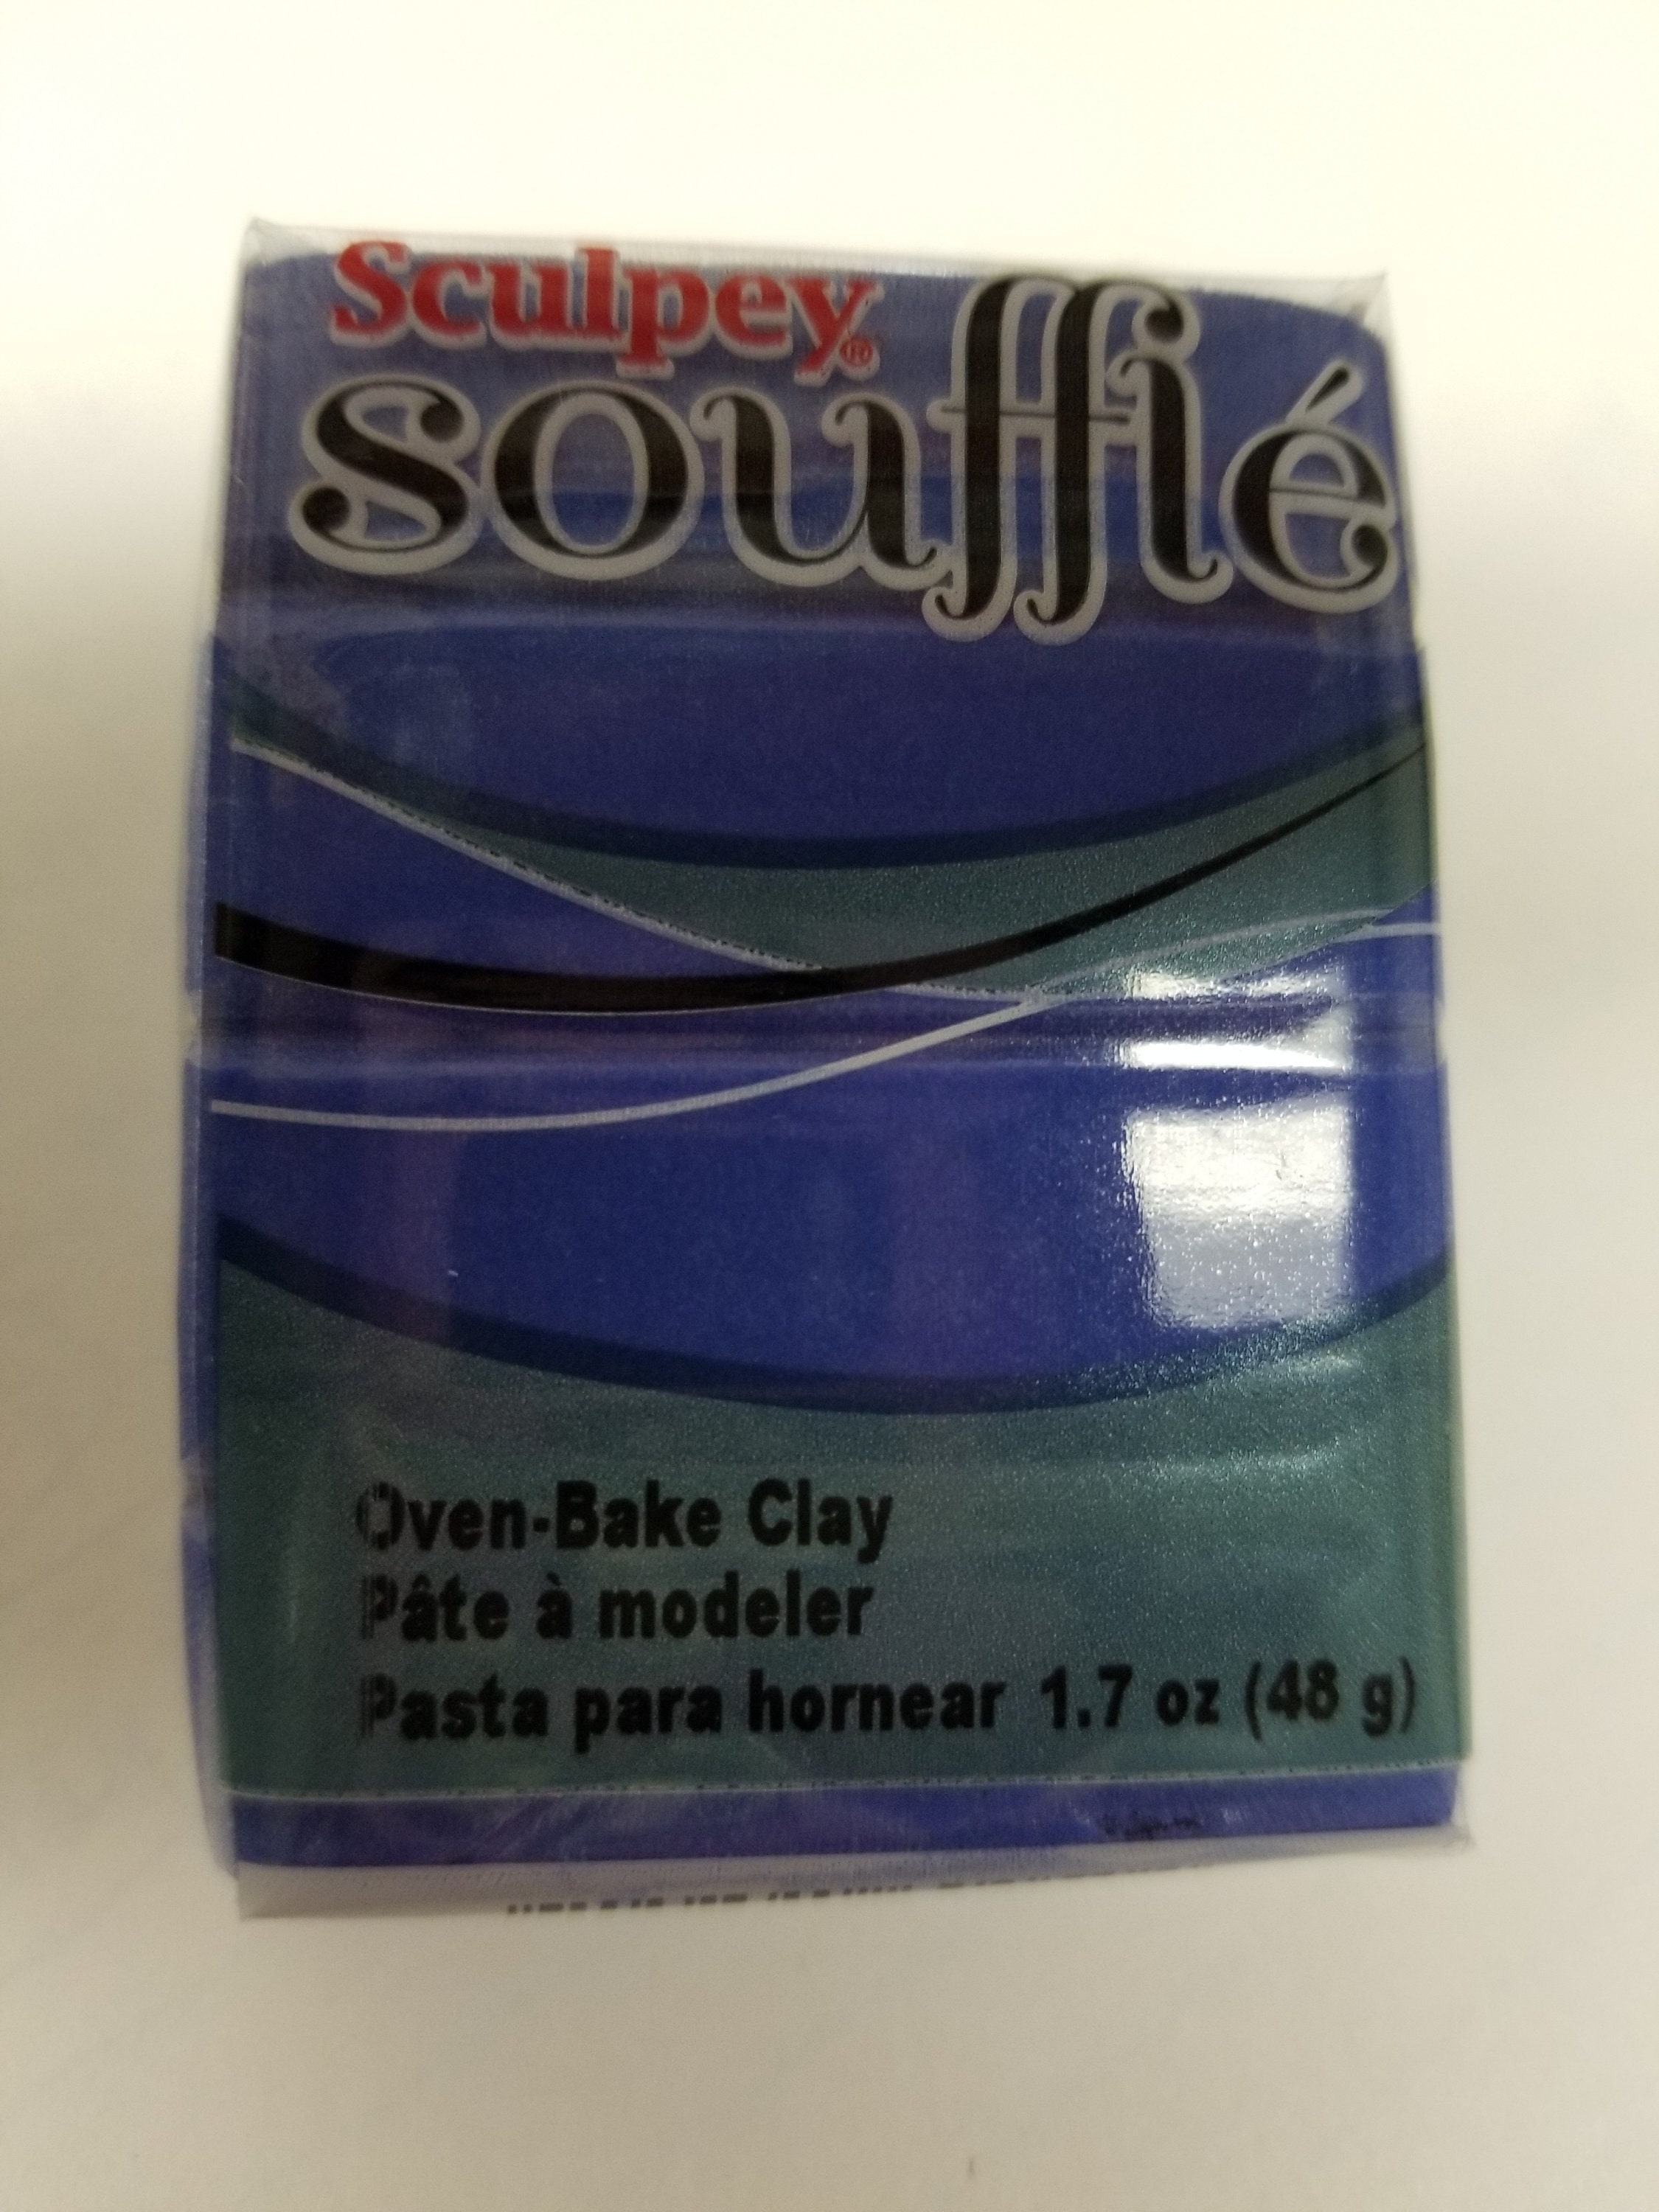 Sculpey Premo Polymer Clay 2oz-Pale Blue, 1 count - Foods Co.